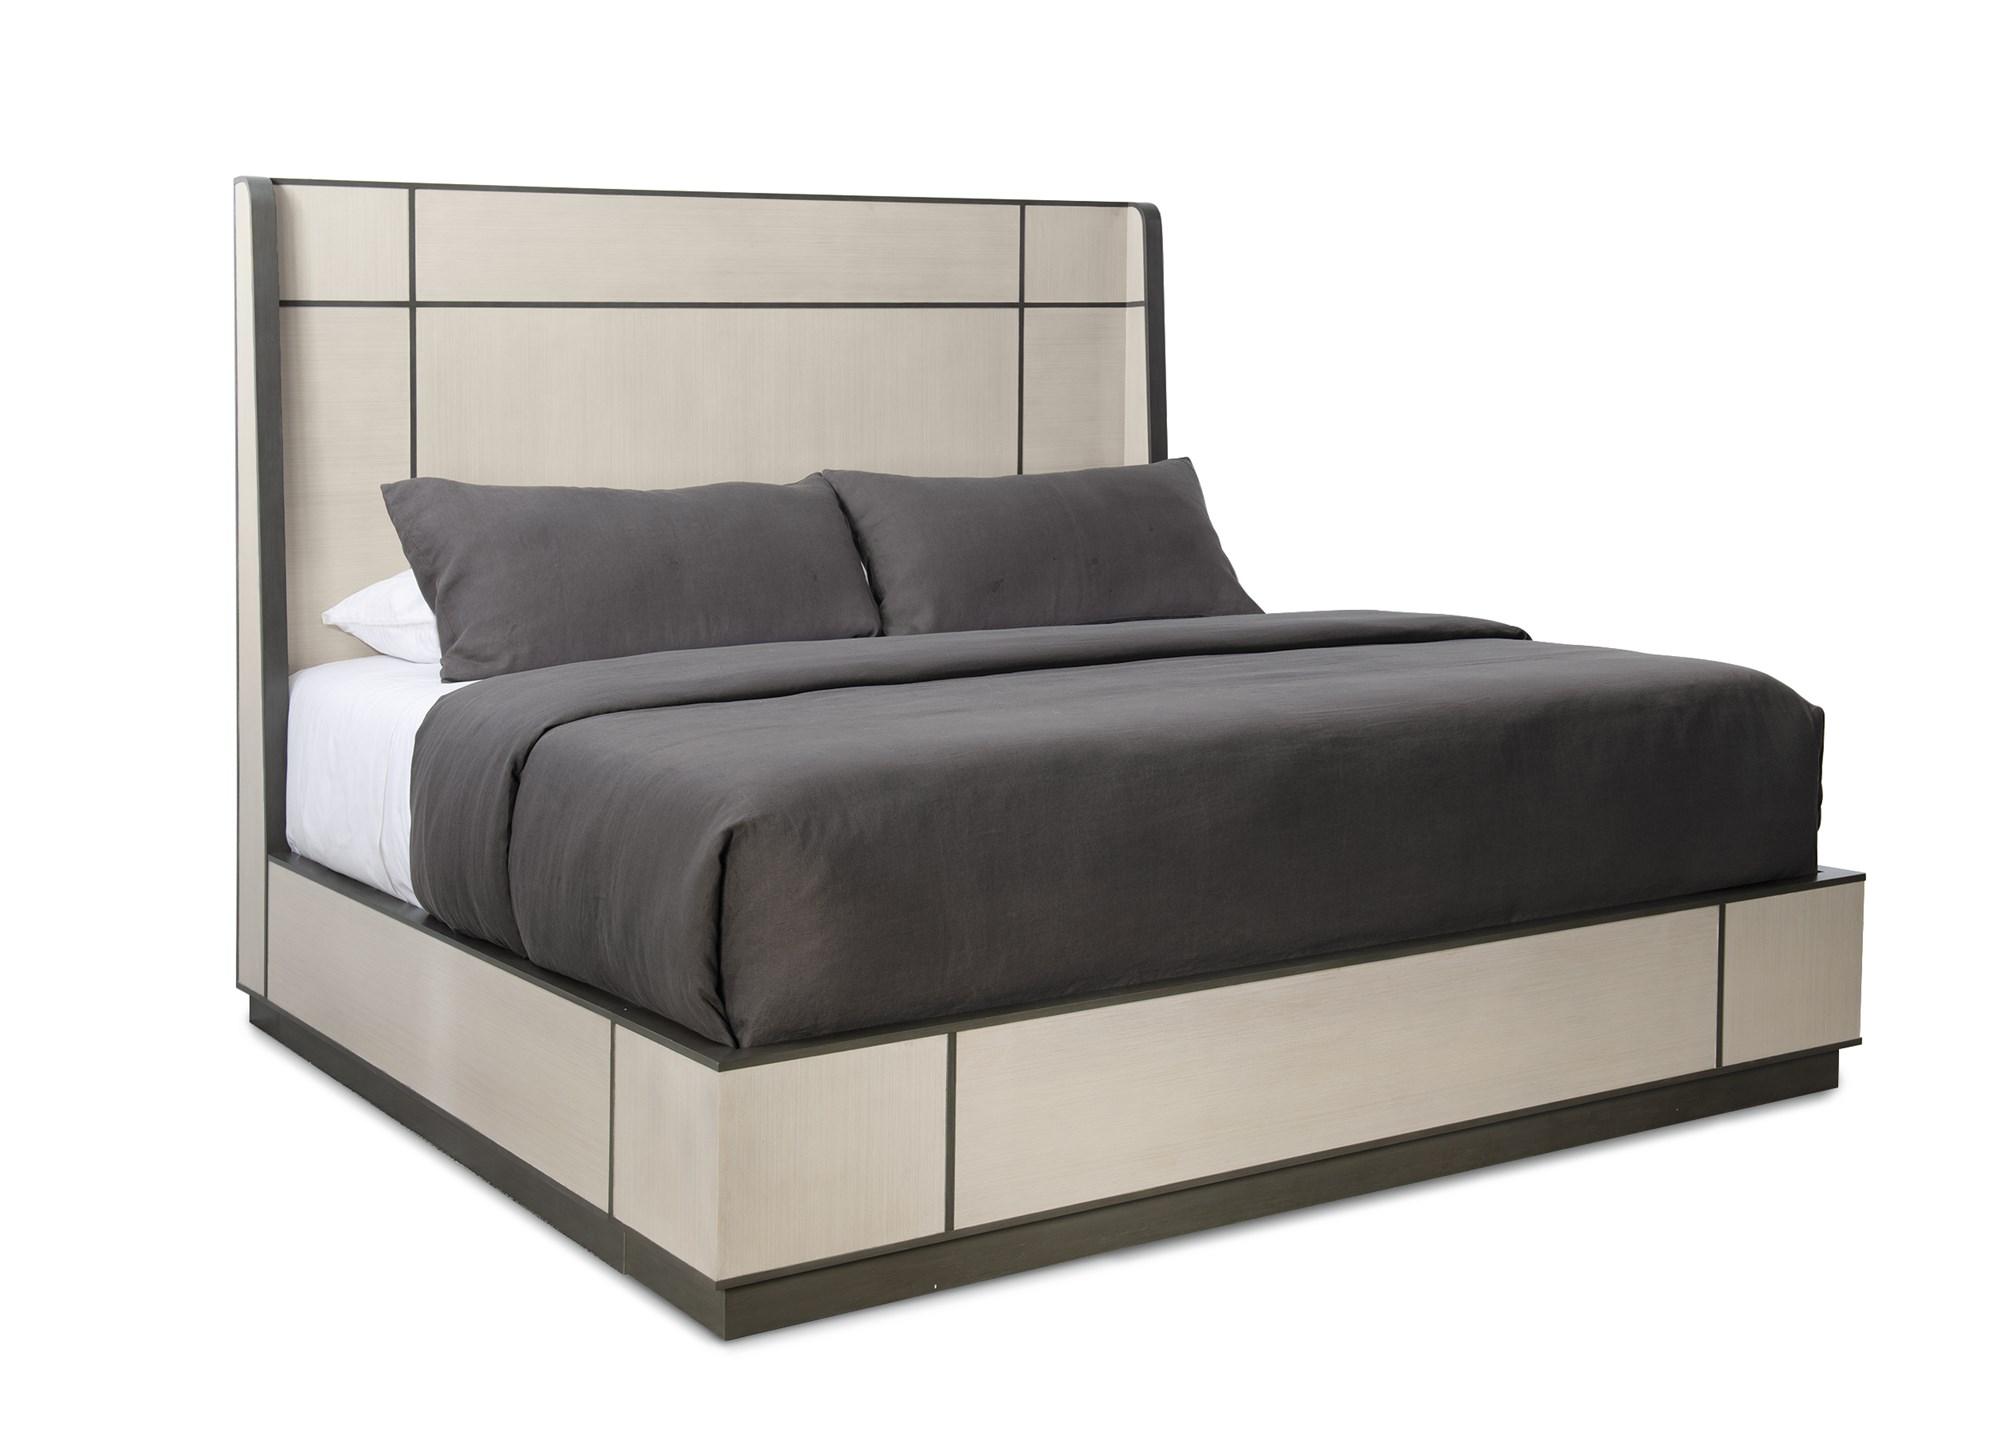 

    
Ashe Taupe Finish Zinc Oxide Inlay King REPETITION WOOD BED by Caracole
